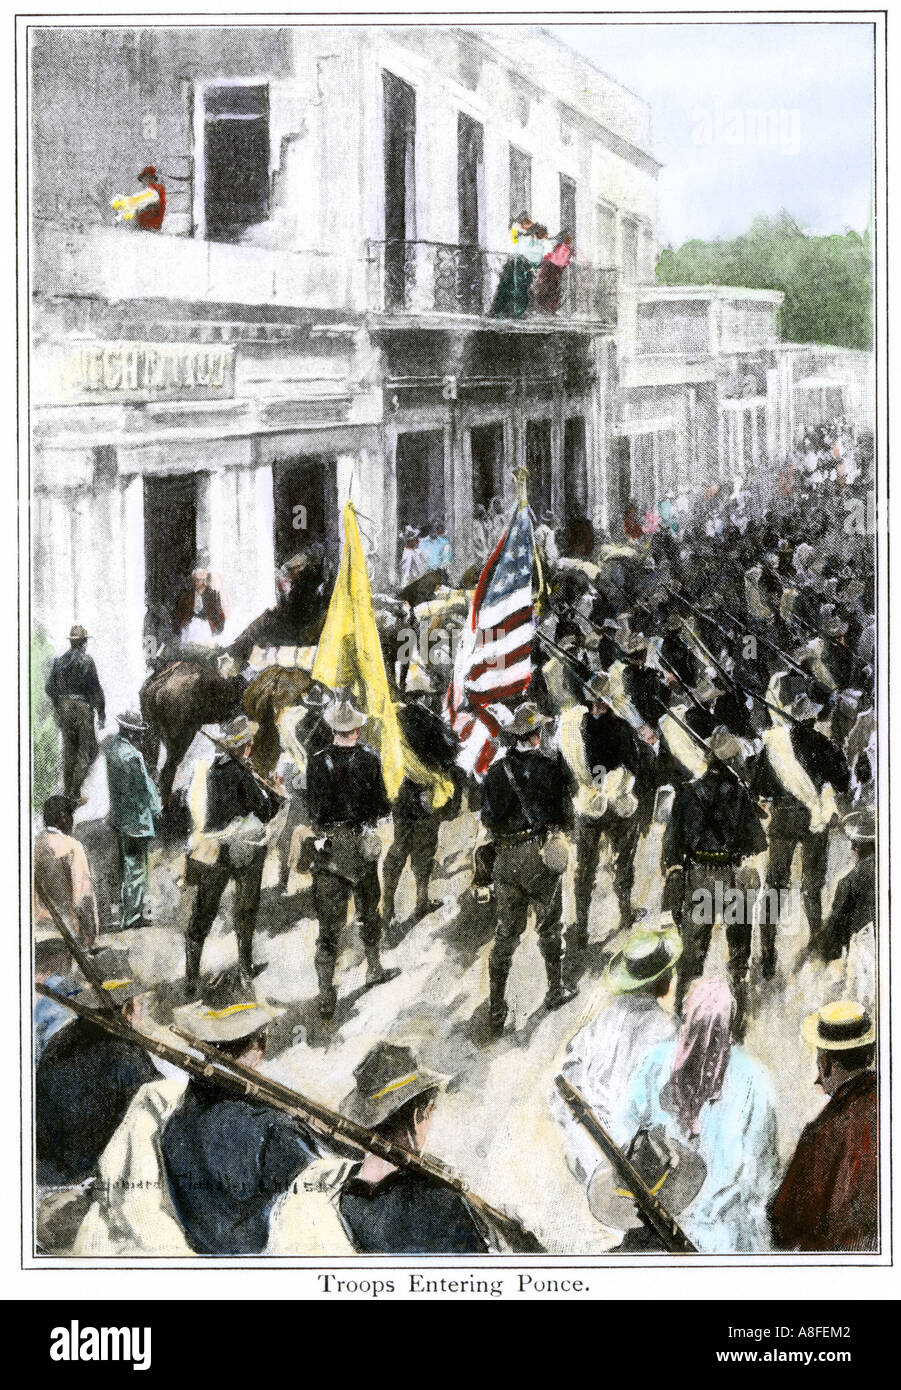 https://c8.alamy.com/comp/A8FEM2/us-troops-entering-ponce-puerto-rico-in-during-the-spanish-american-A8FEM2.jpg